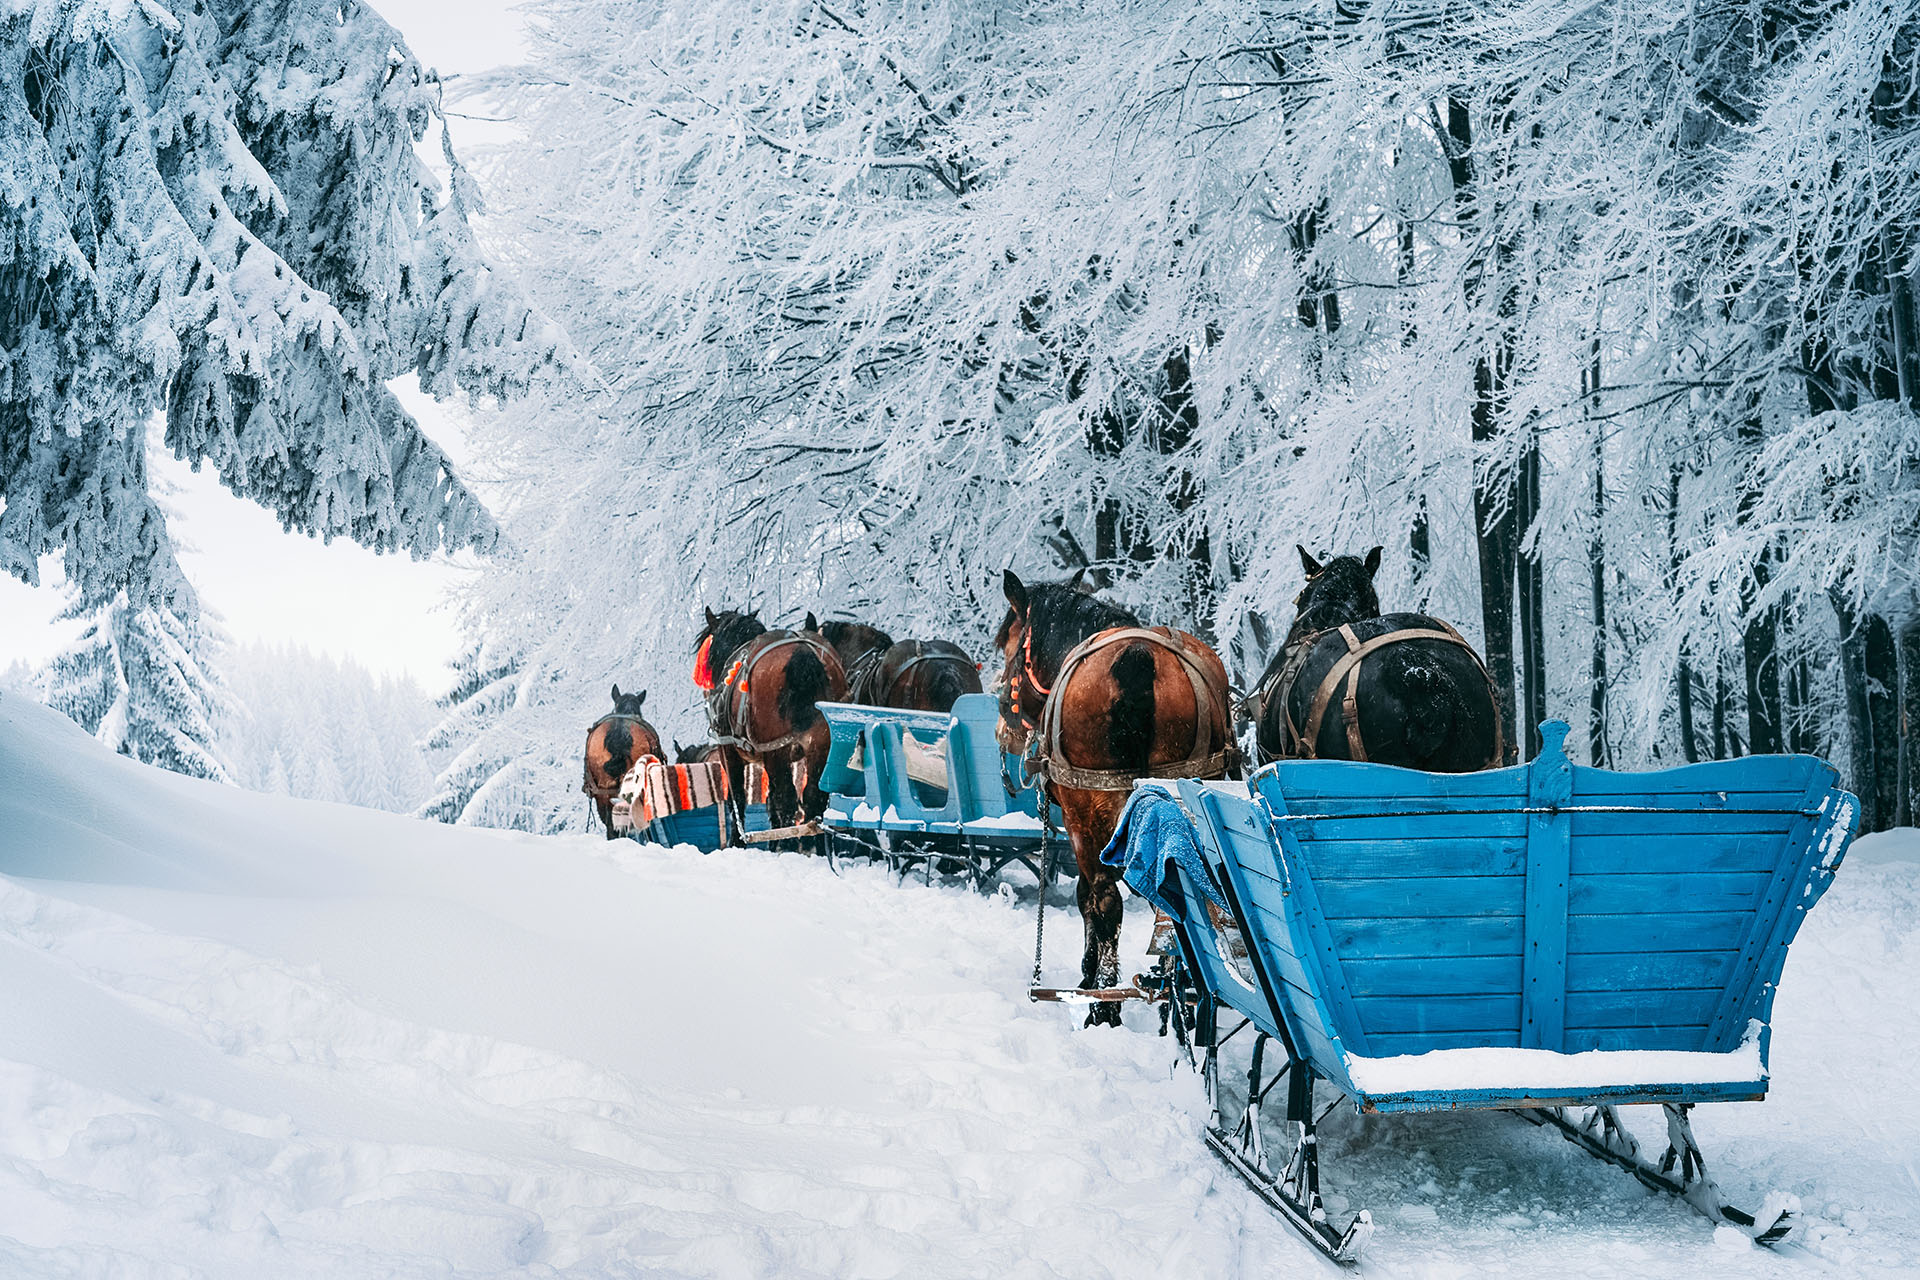 Two Sleigh Bells Required When Travelling Upon a Highway By Sleigh Pulled By Horse or Reindeer